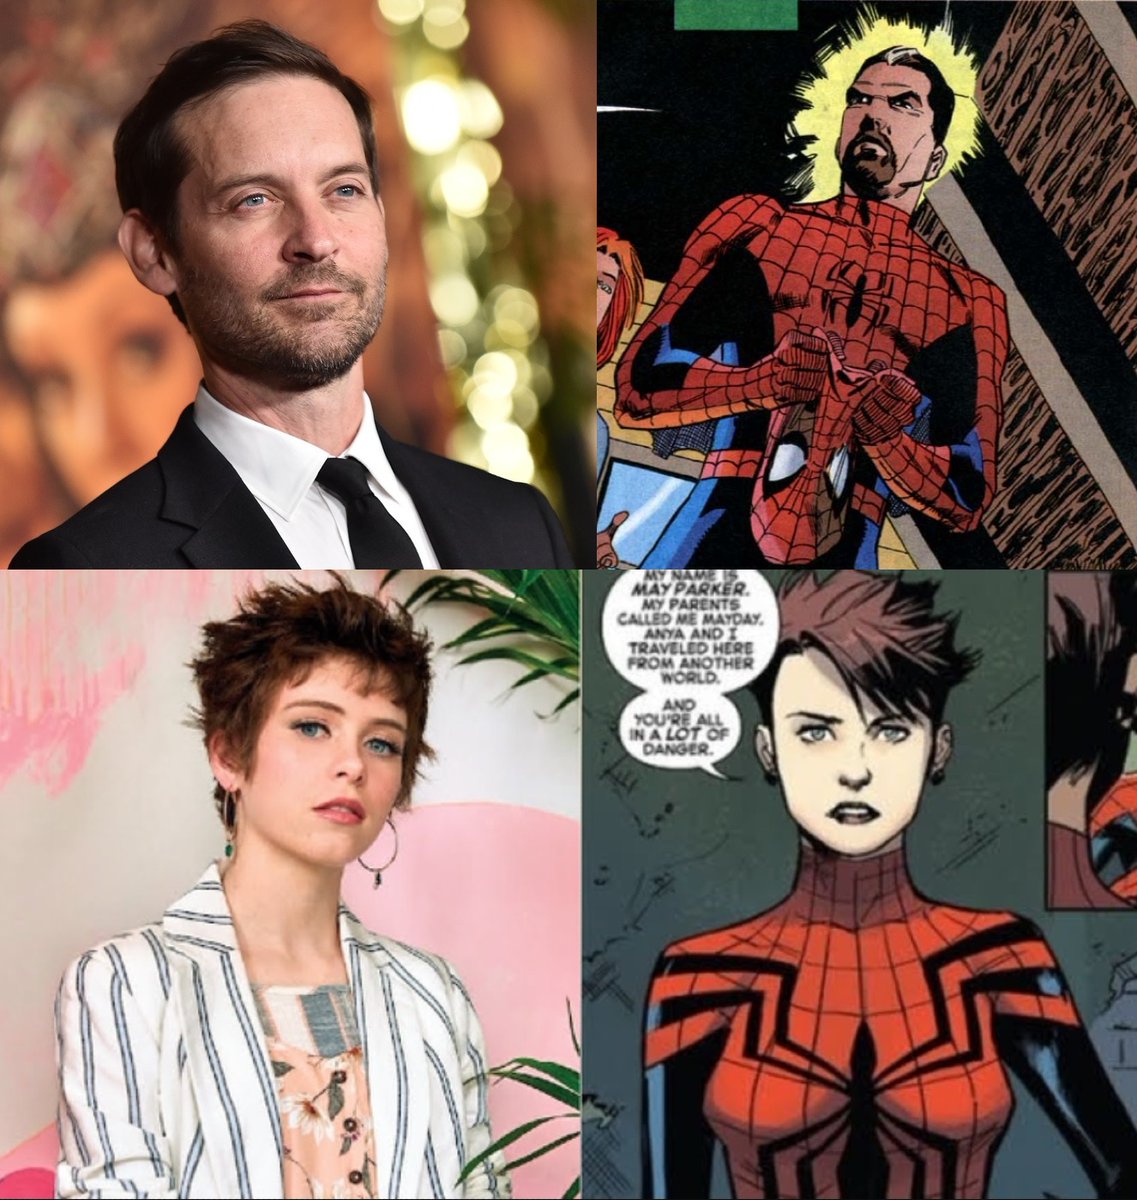 @DEADLINE Please @SonyPictures , give Sam Raimi a chance to make Spider-Man 4 with Tobey Maguire. They could adapt the story where Peter Parker is over 40 years old, married to MJ, and they have a daughter named Mayday Parker who becomes Spider-Girl  🥺🙏
#MakeRaimiSpiderMan4